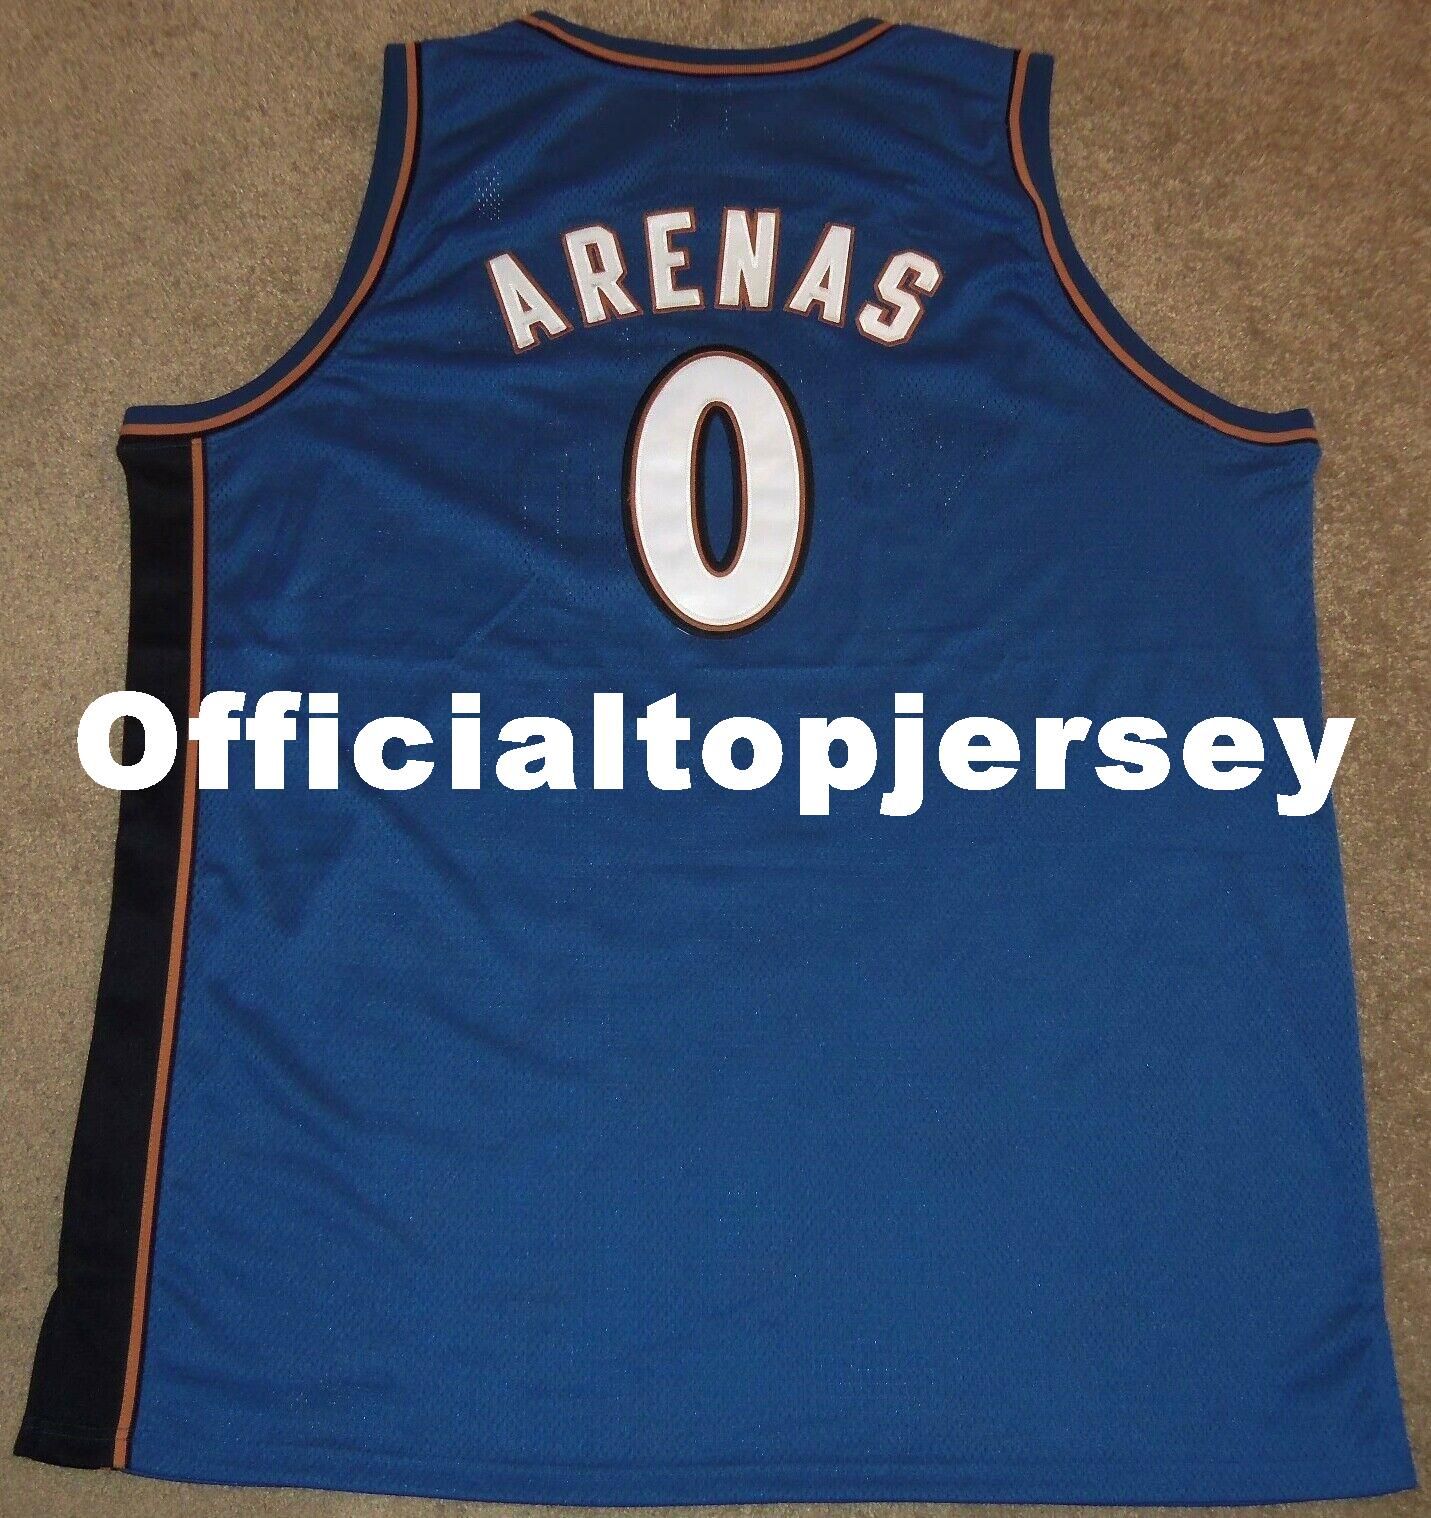 ad jersey number